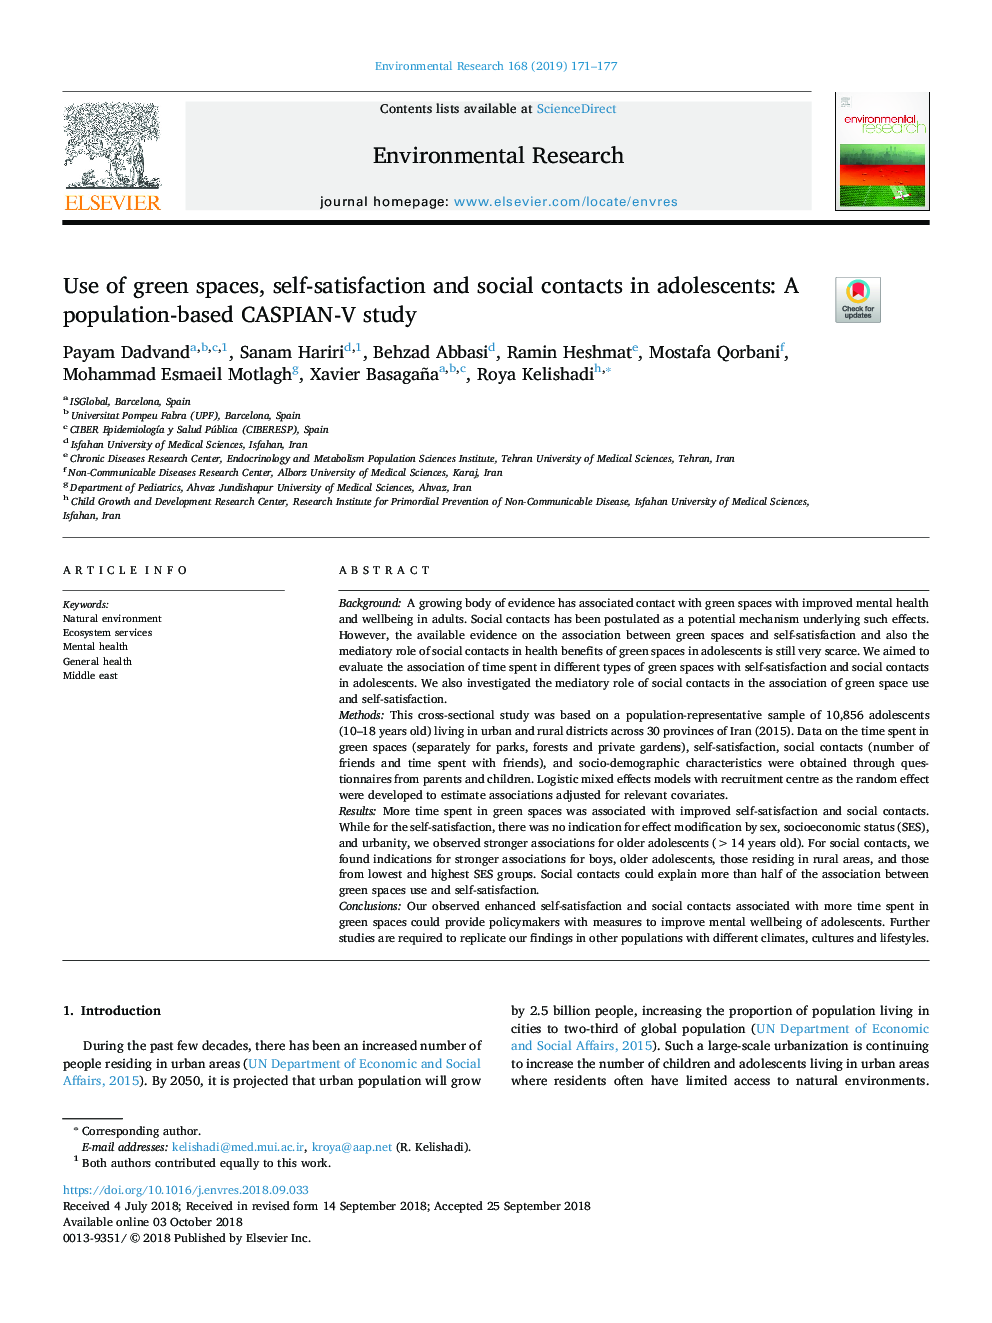 Use of green spaces, self-satisfaction and social contacts in adolescents: A population-based CASPIAN-V study